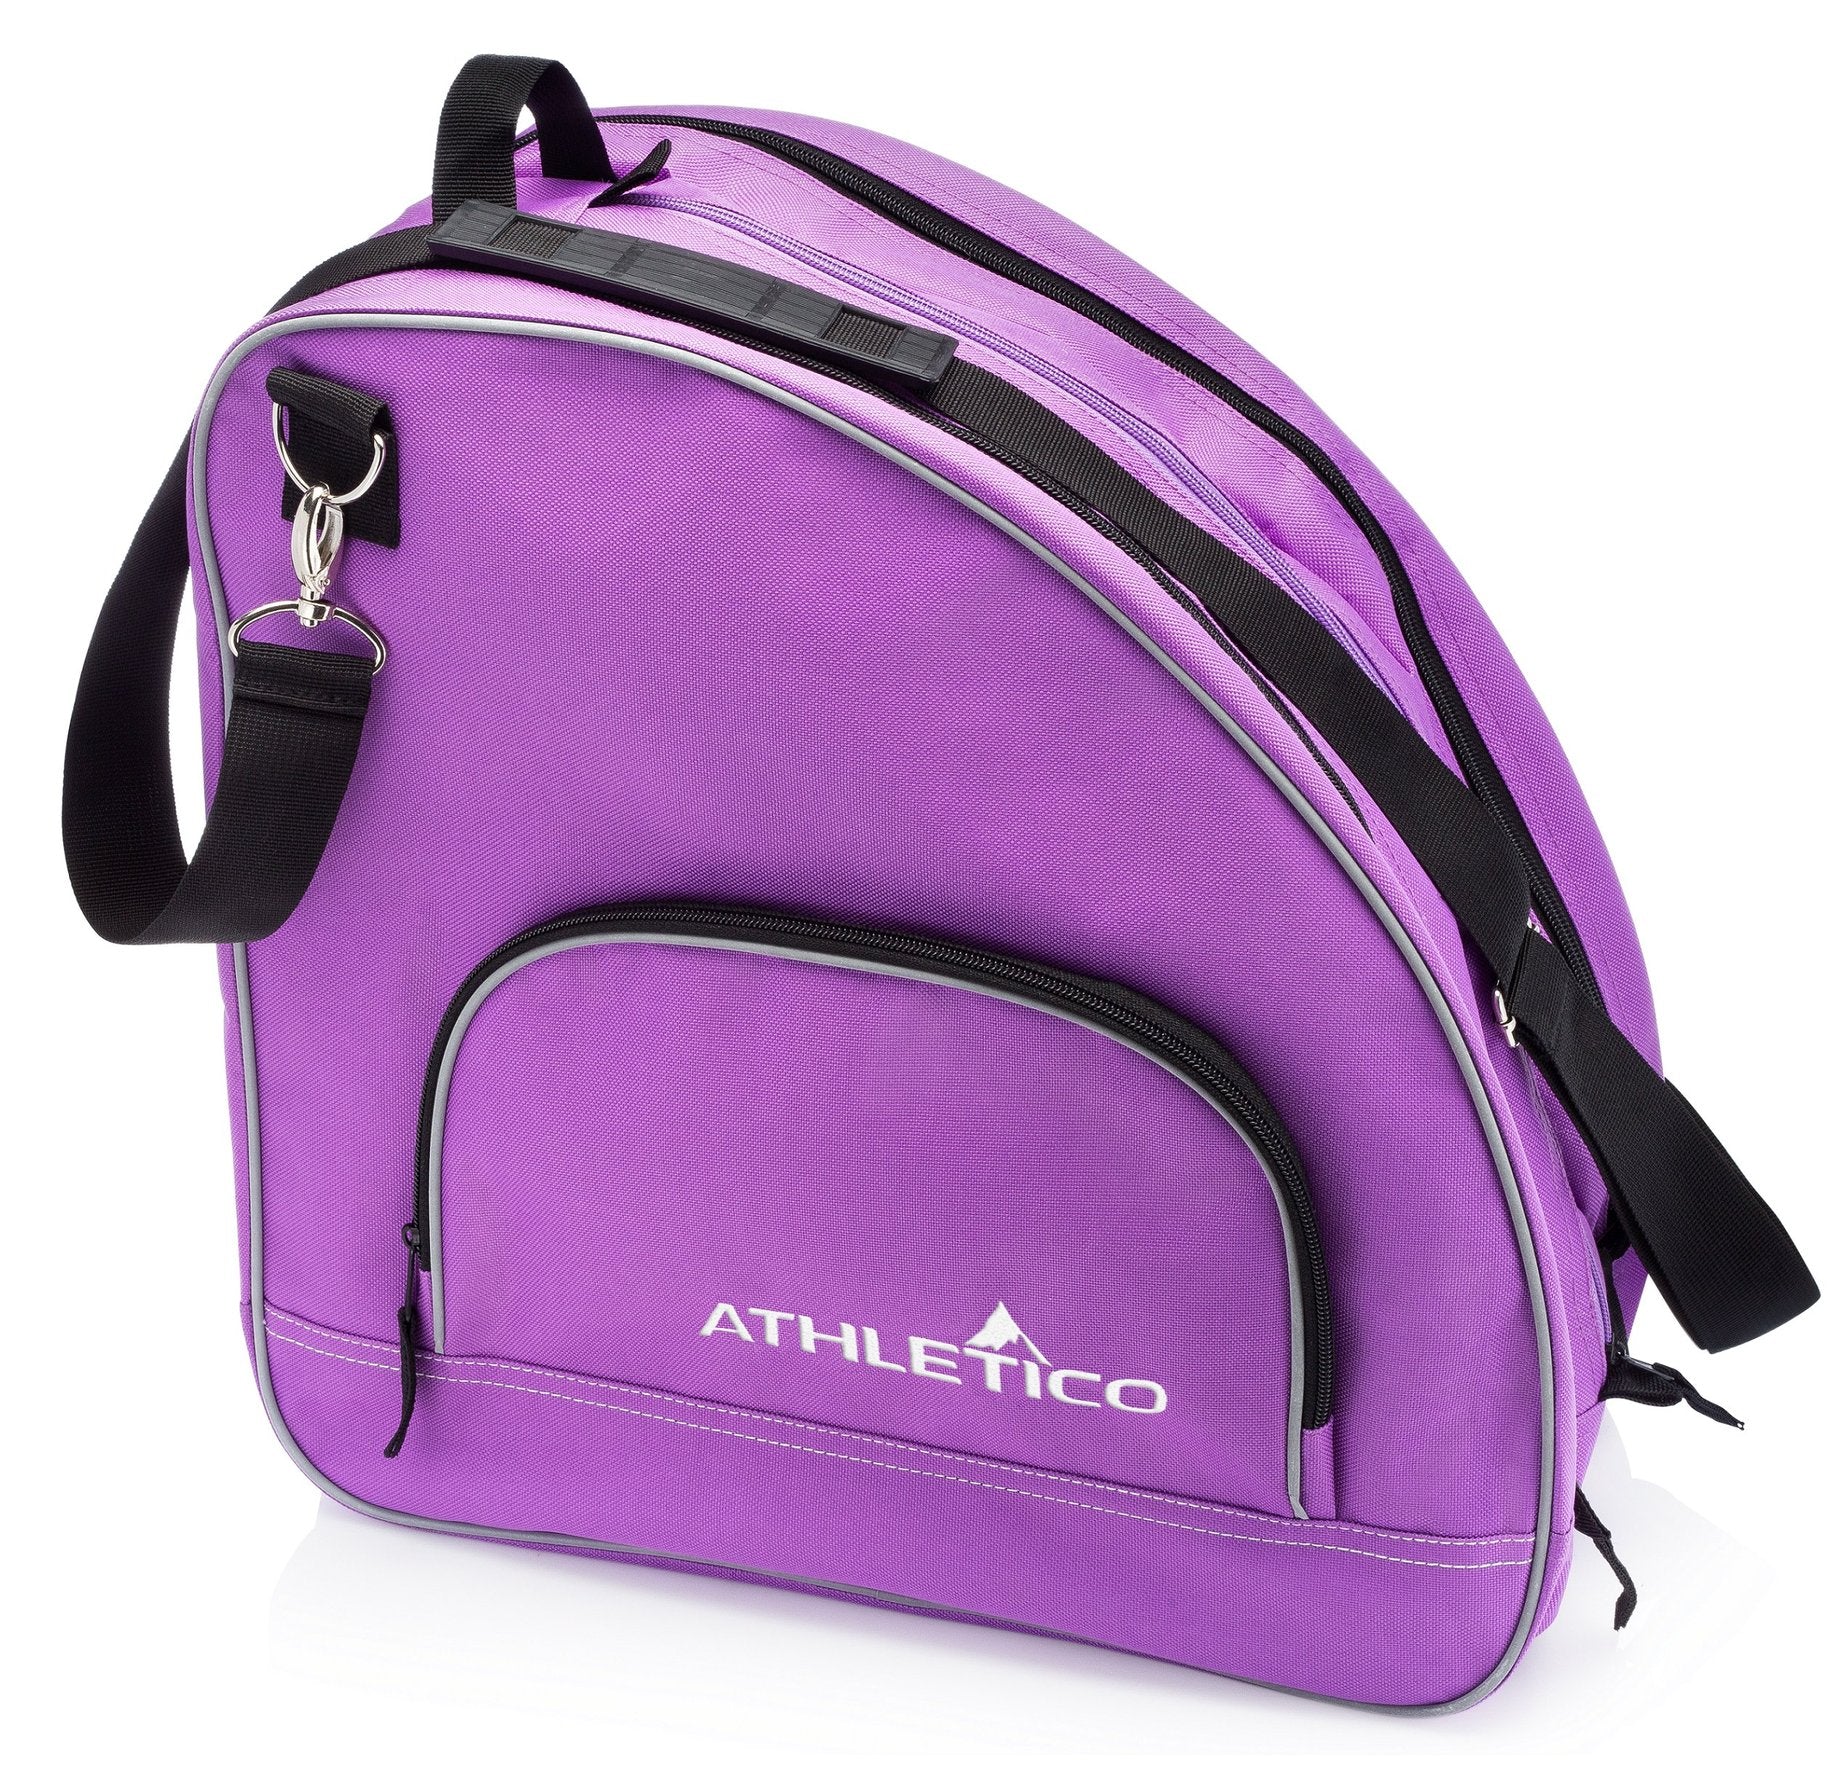 Athletico Ice & Inline Skate Bag - Premium Bag to Carry Ice Skates, Roller Skates, Inline Skates for Both Kids and Adults (Purple)